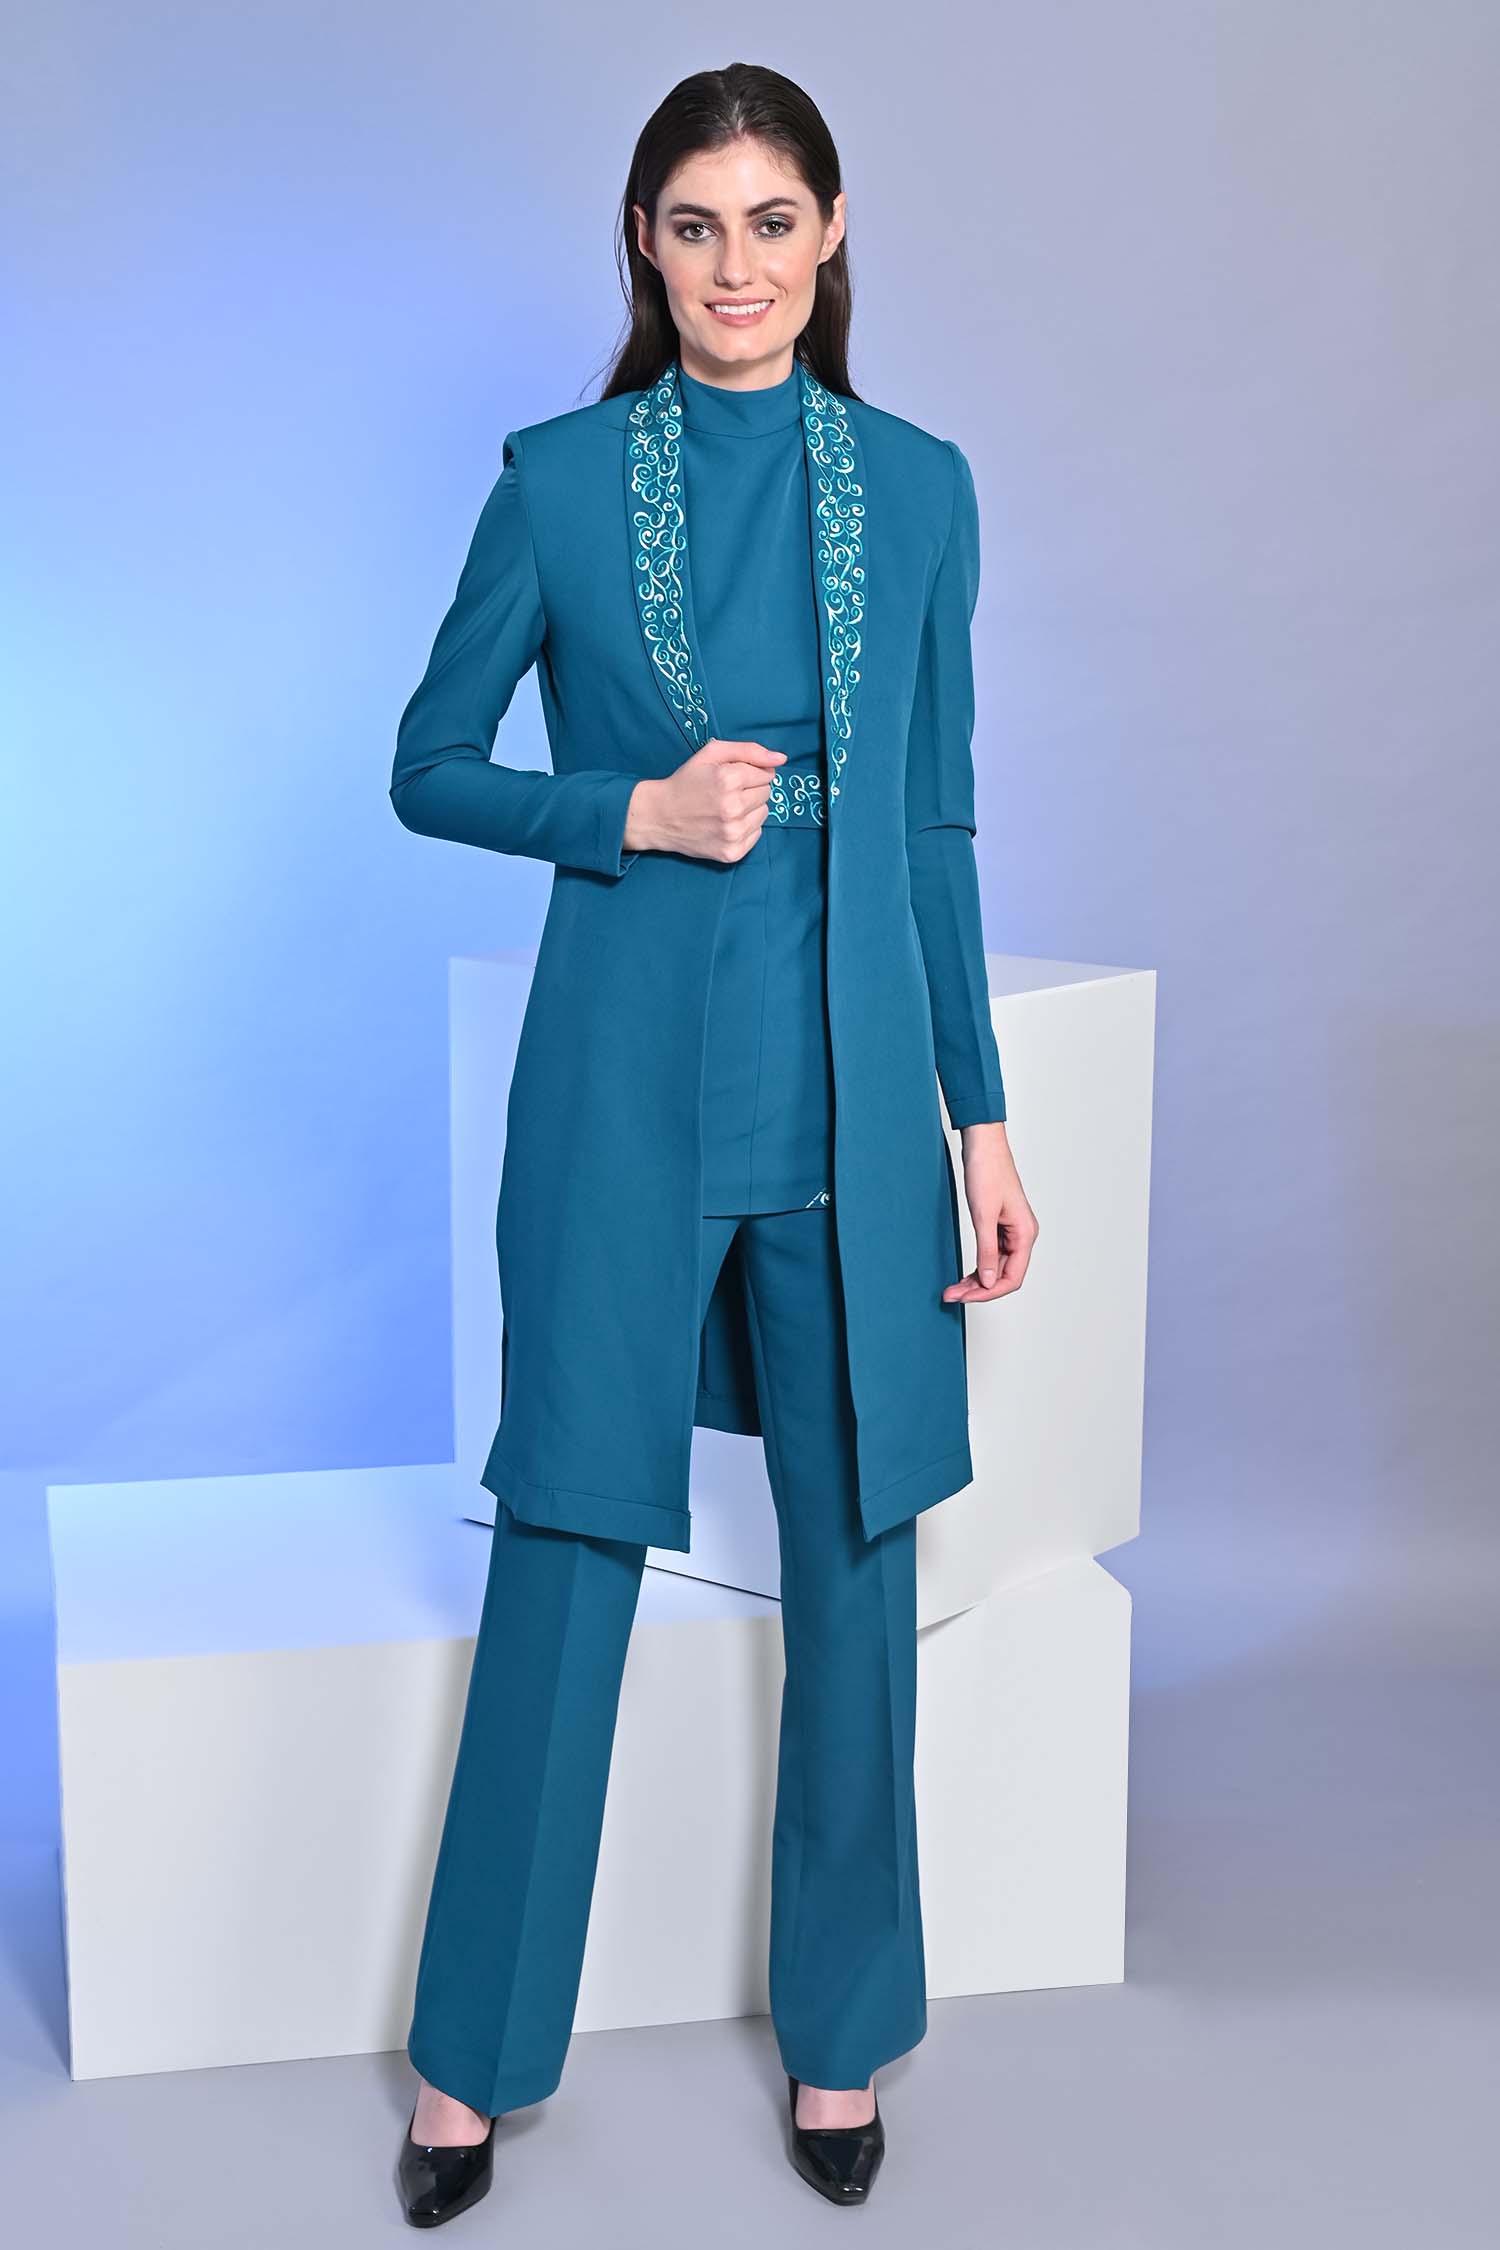 Long Embroidered Teal Blue Slit Blazer With Top And Pants